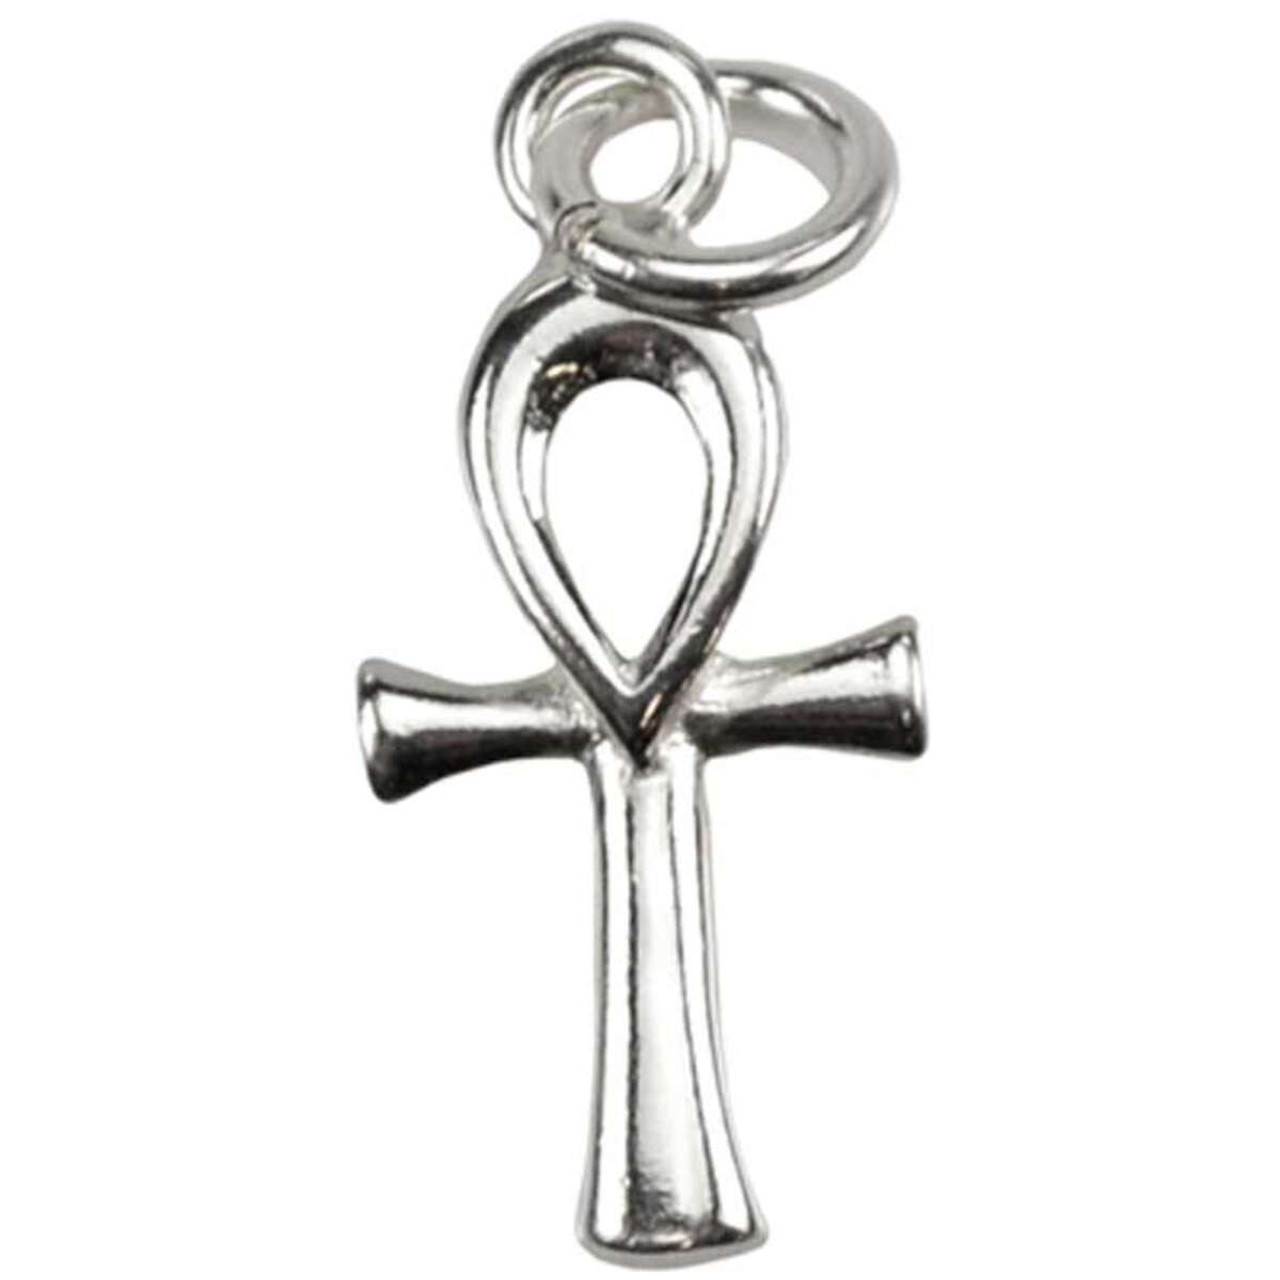 Ankh Pendant Sterling Silver - Small